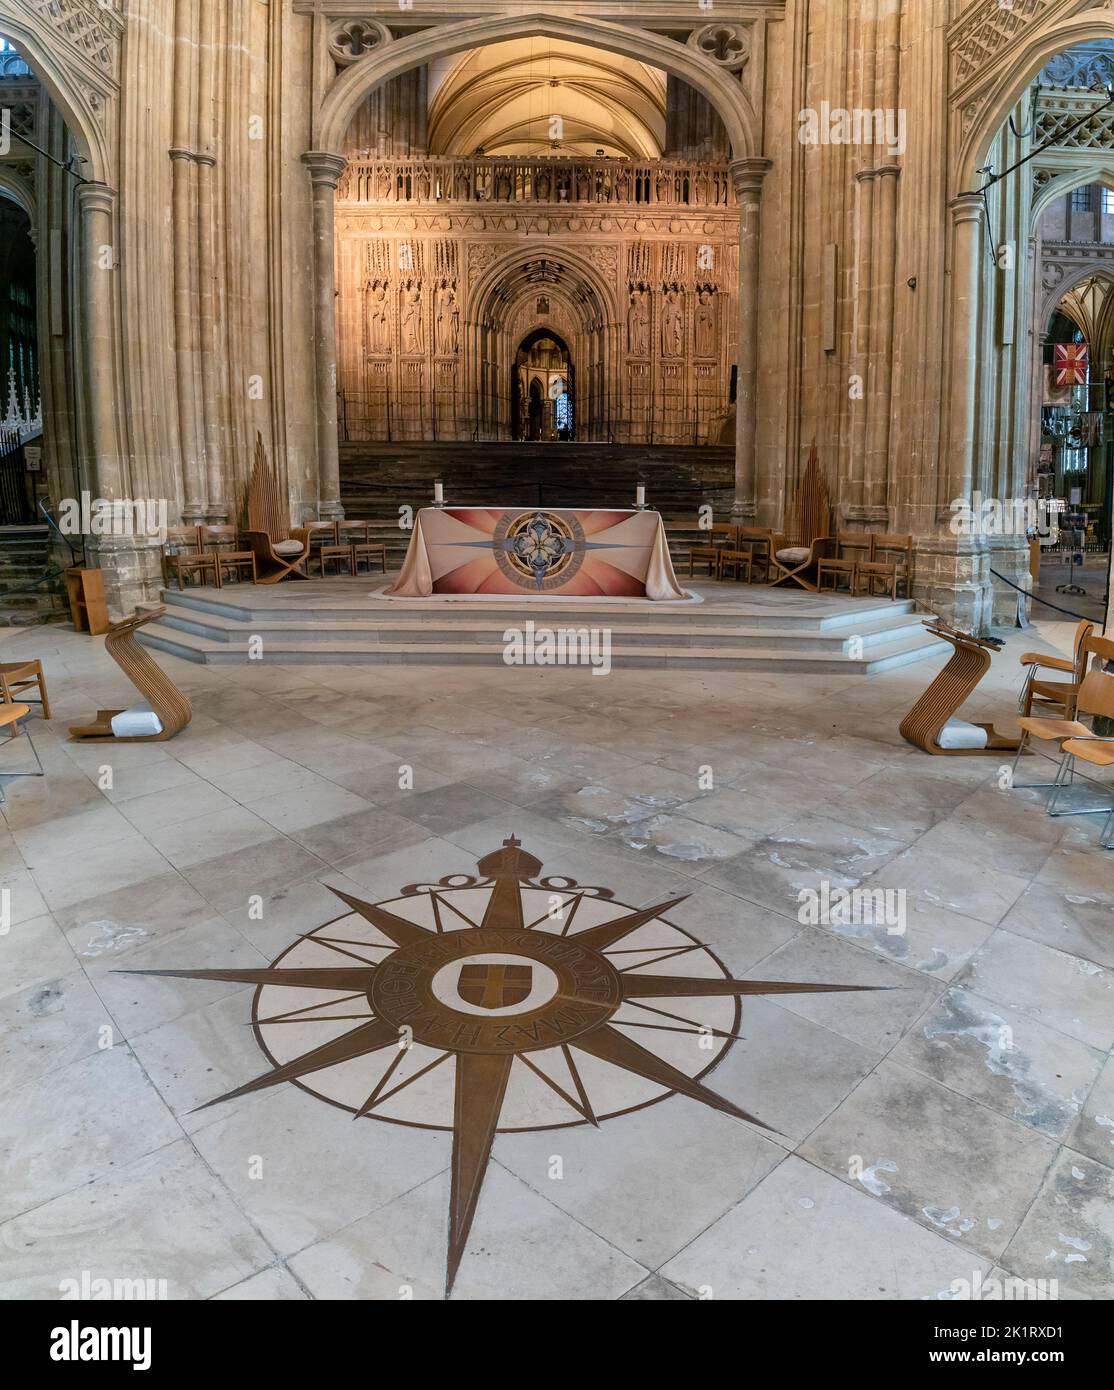 Canterbury, United Kingdom - 10 September, 2022: compass rose of the Anglican Communion and altar in the central nave of the Canterbury Cathedral Stock Photo